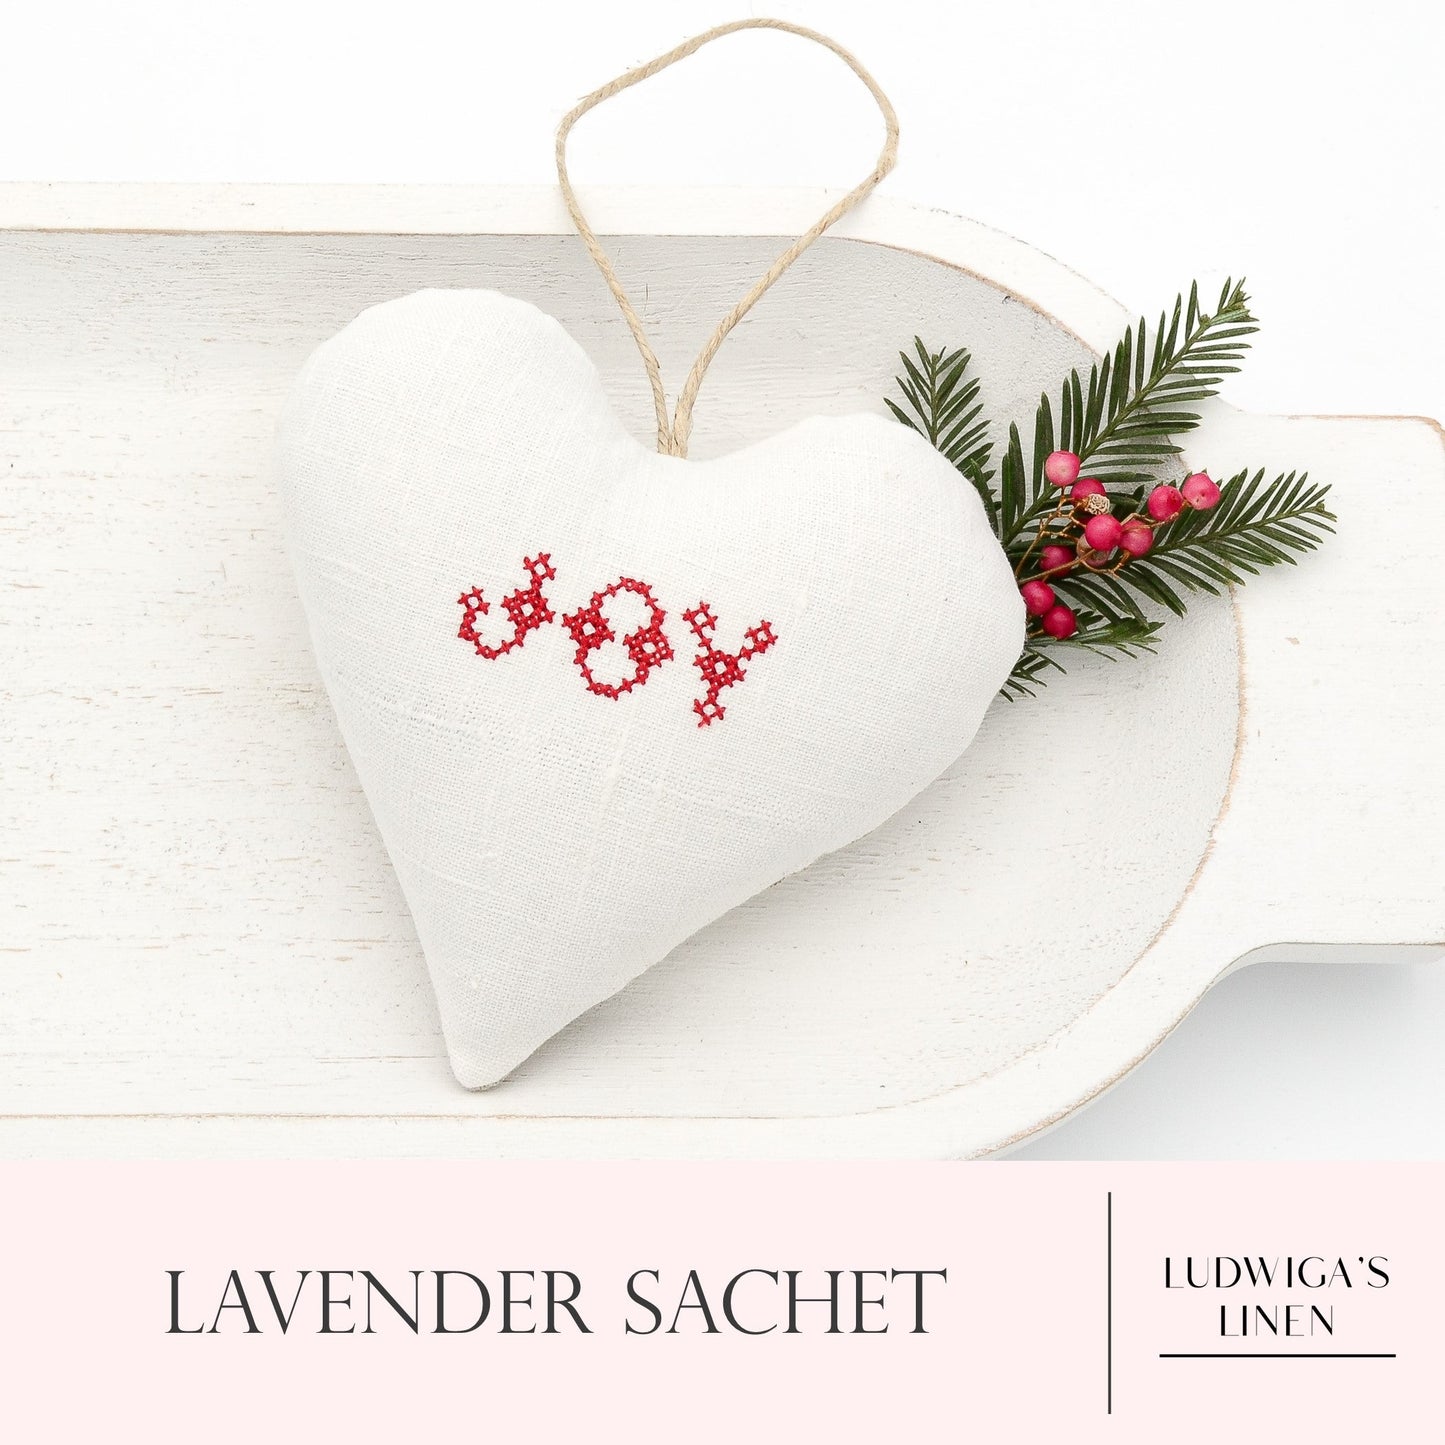 Antique/vintage French/German linen Christmas lavender sachet heart, hemp twine tie and filled with high quality lavender from Provence France